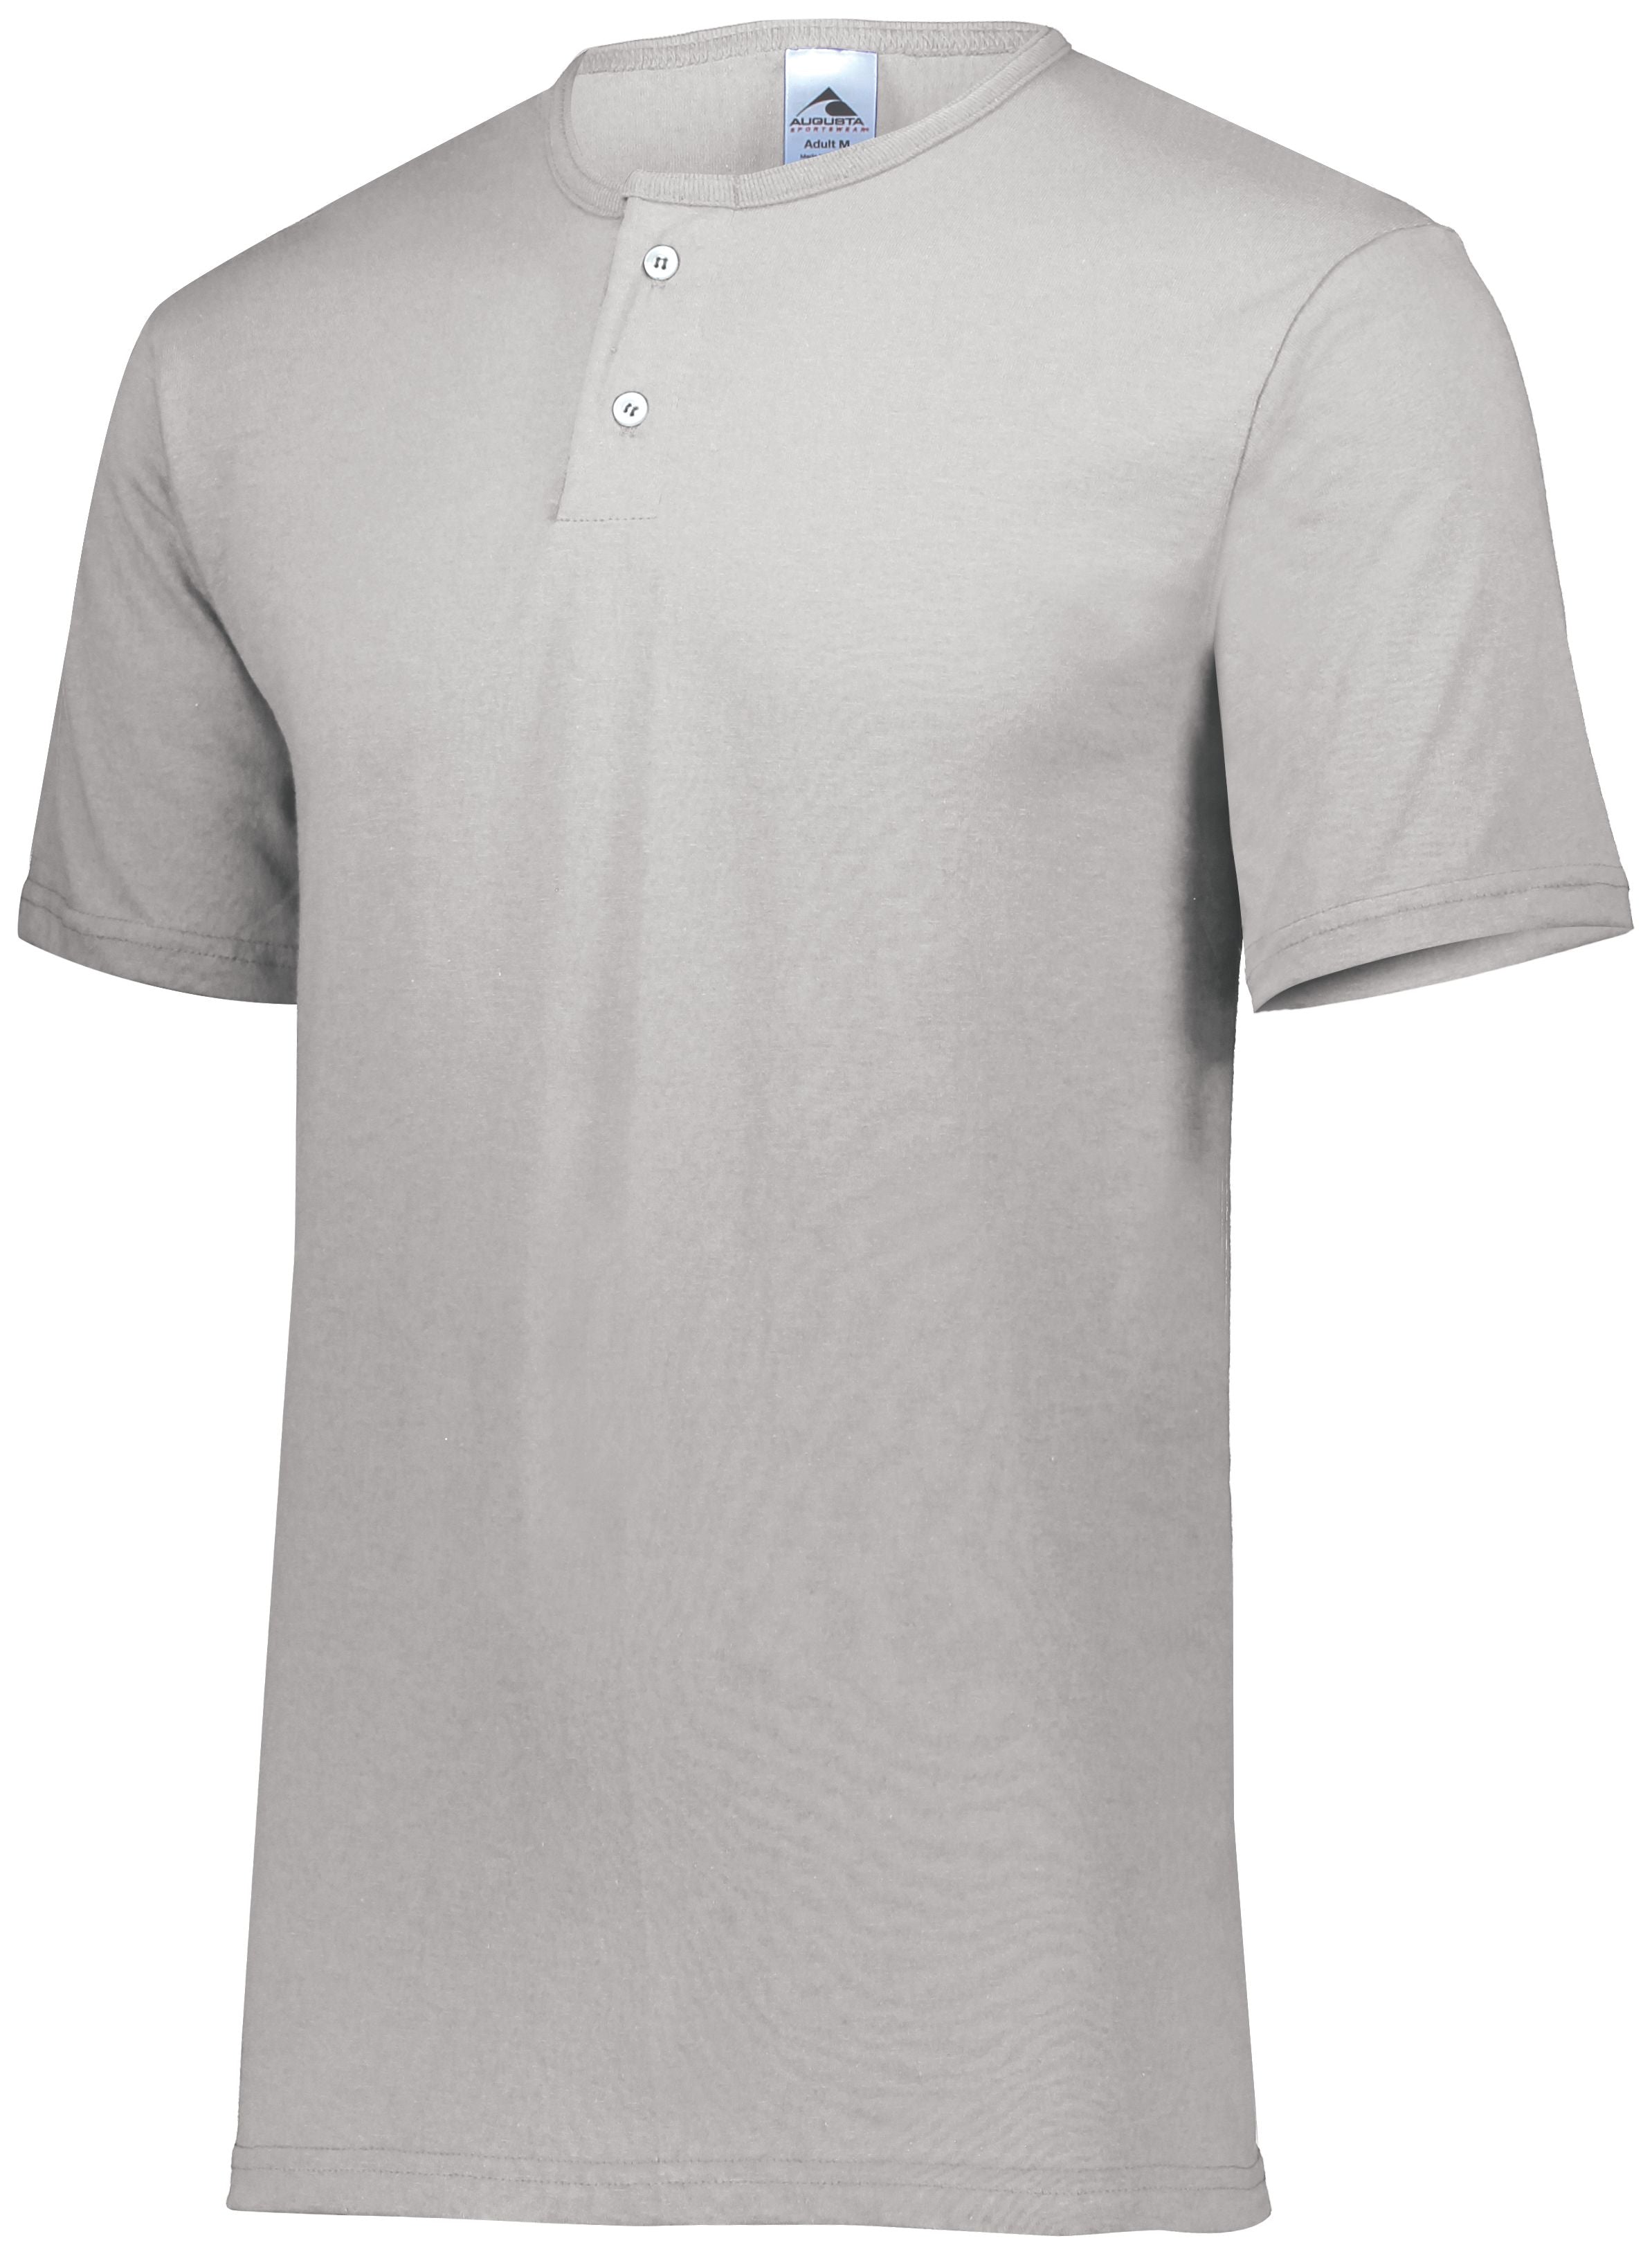 Augusta Sportswear Two-Button Baseball Jersey in Silver Grey  -Part of the Adult, Adult-Jersey, Augusta-Products, Baseball, Shirts, All-Sports, All-Sports-1 product lines at KanaleyCreations.com